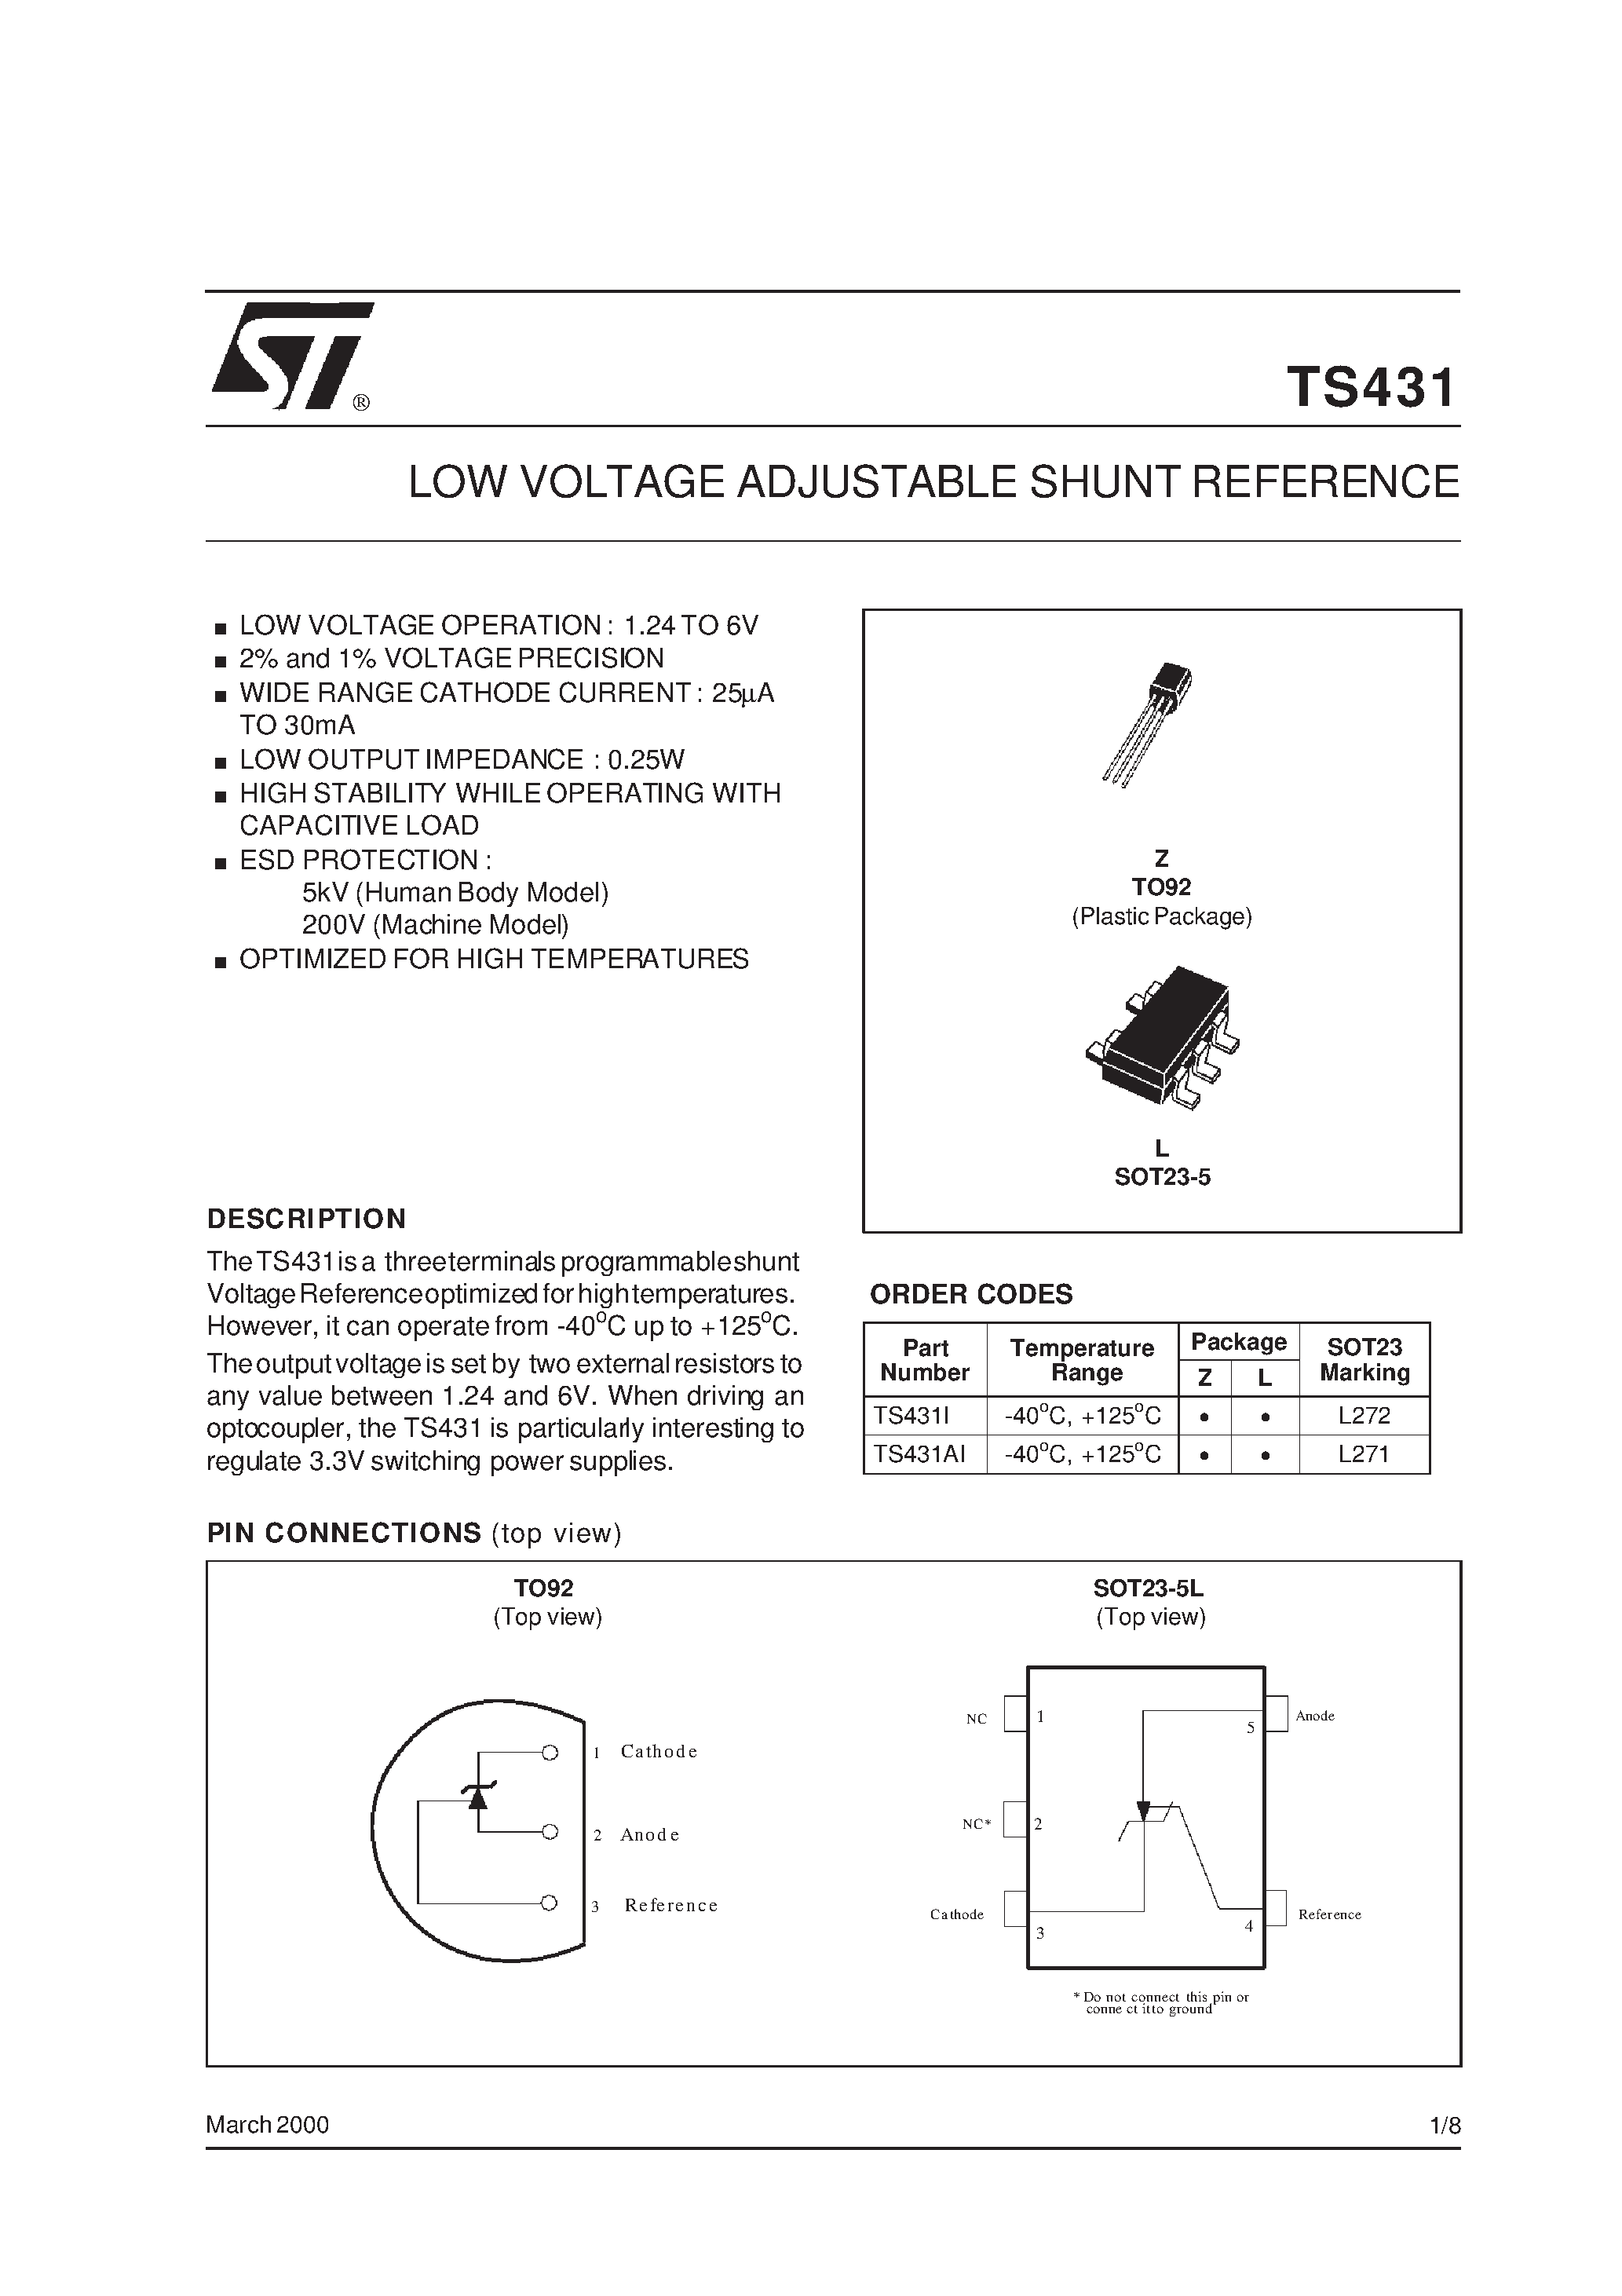 Datasheet TS431I - LOW VOLTAGE ADJUSTABLE SHUNT REFERENCE page 1